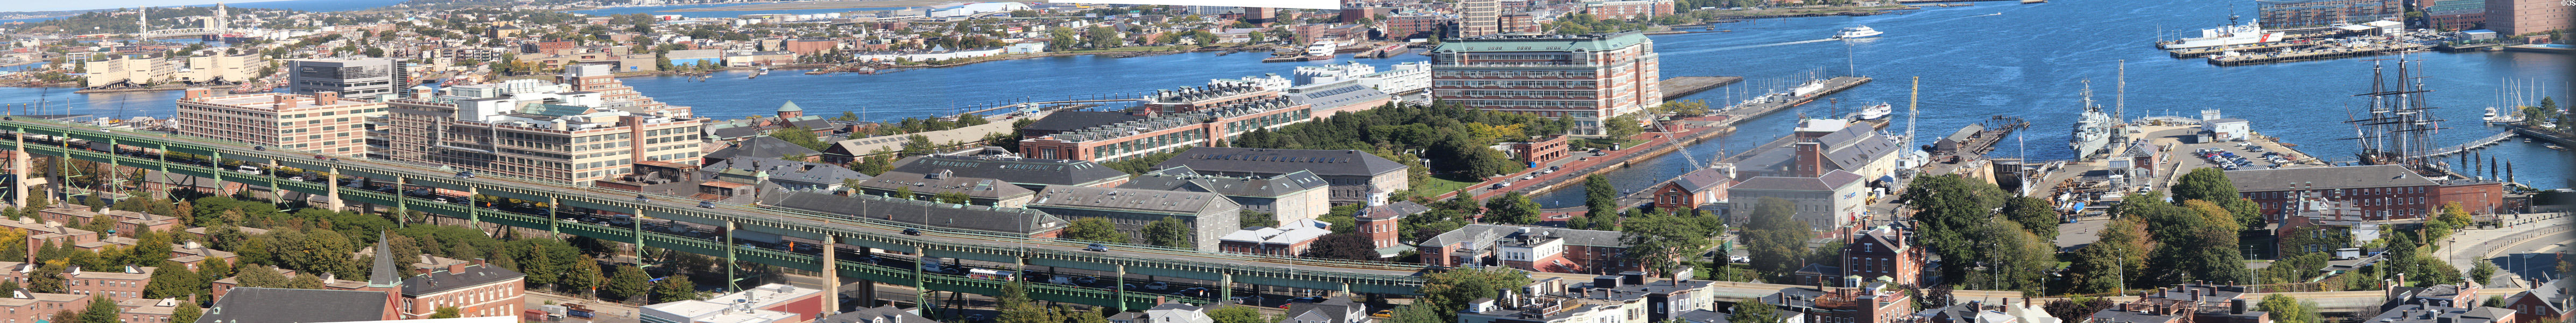 Panorama of Charlestown Navy Yard from Bunker Hill Monument. Boston, MA.